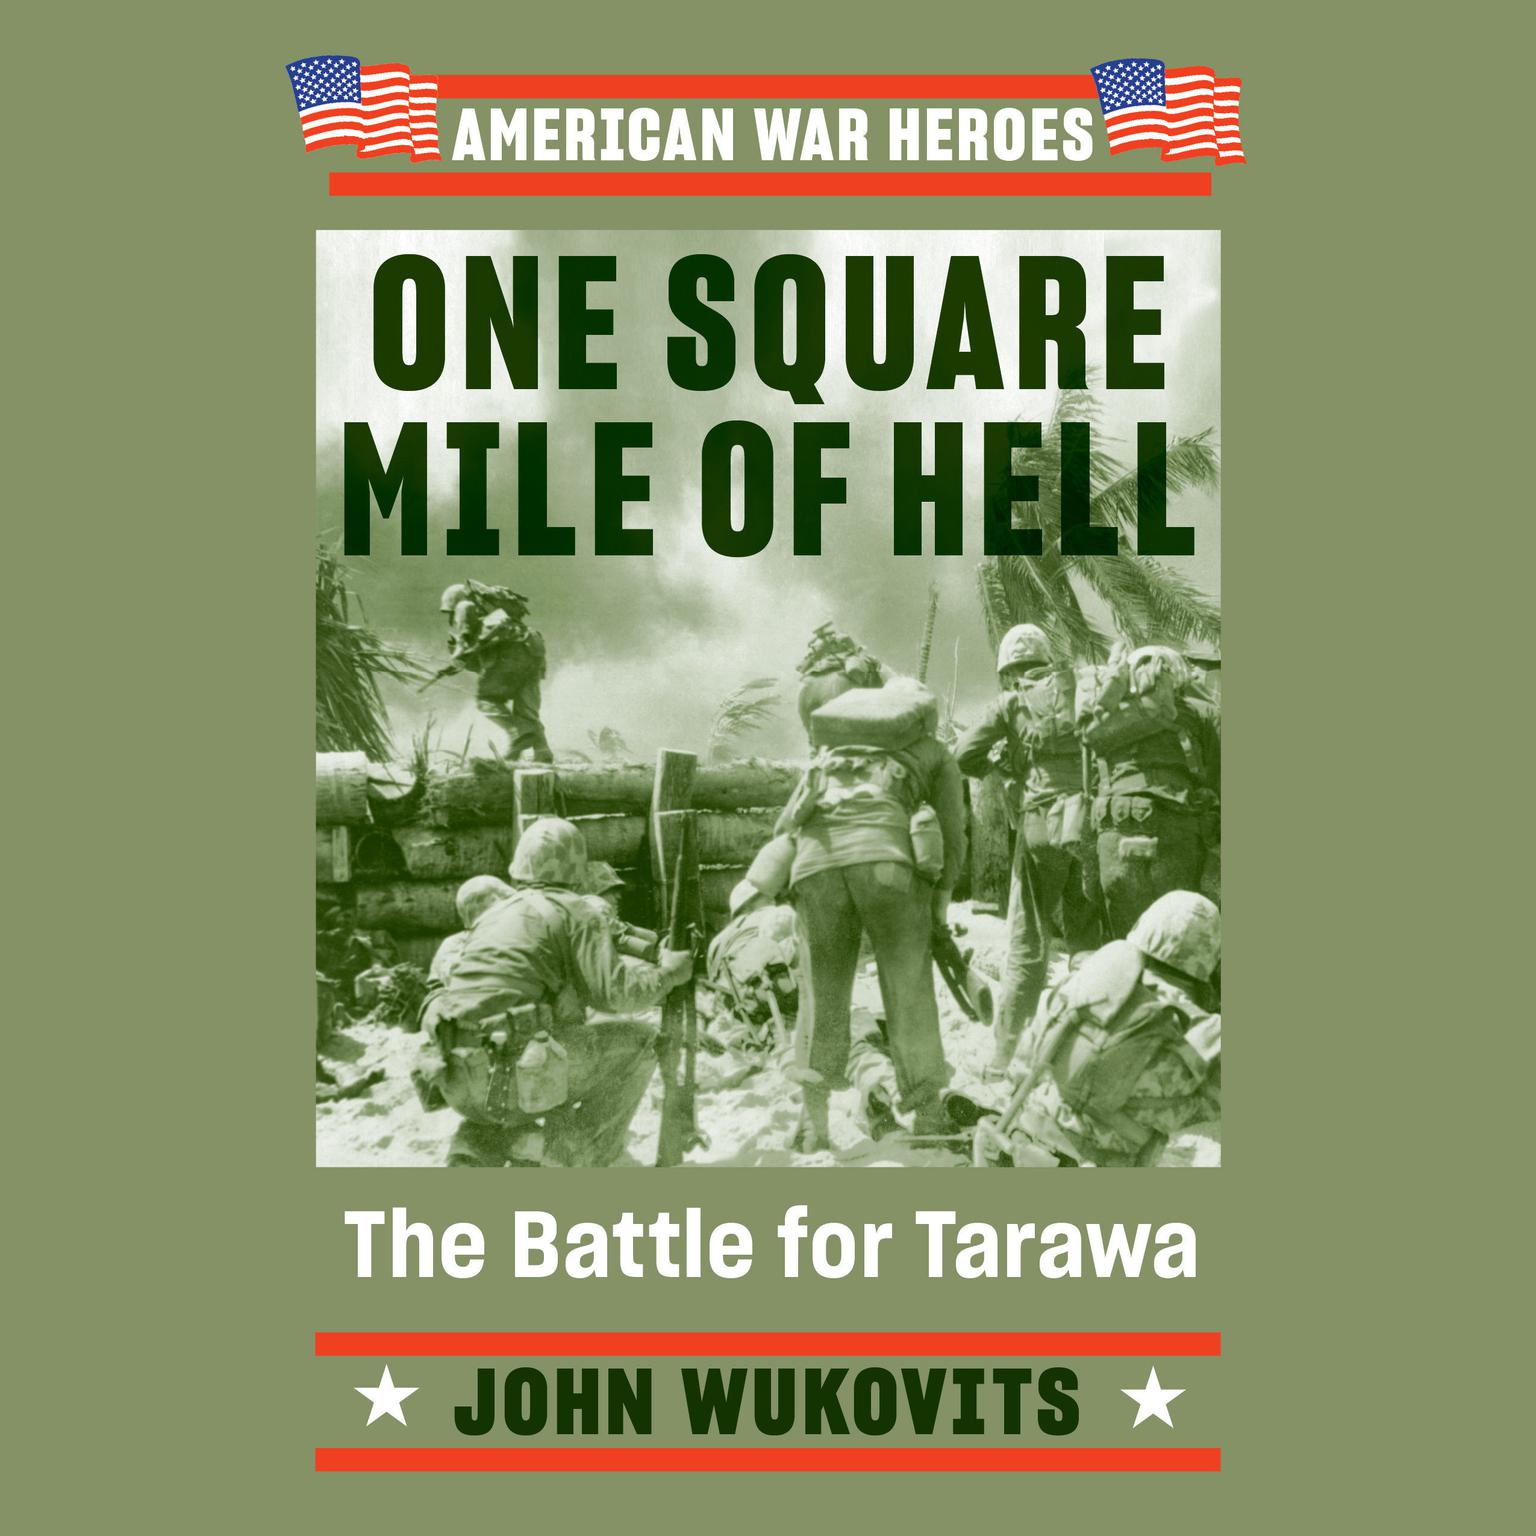 One Square Mile of Hell: The Battle for Tarawa Audiobook, by John Wukovits